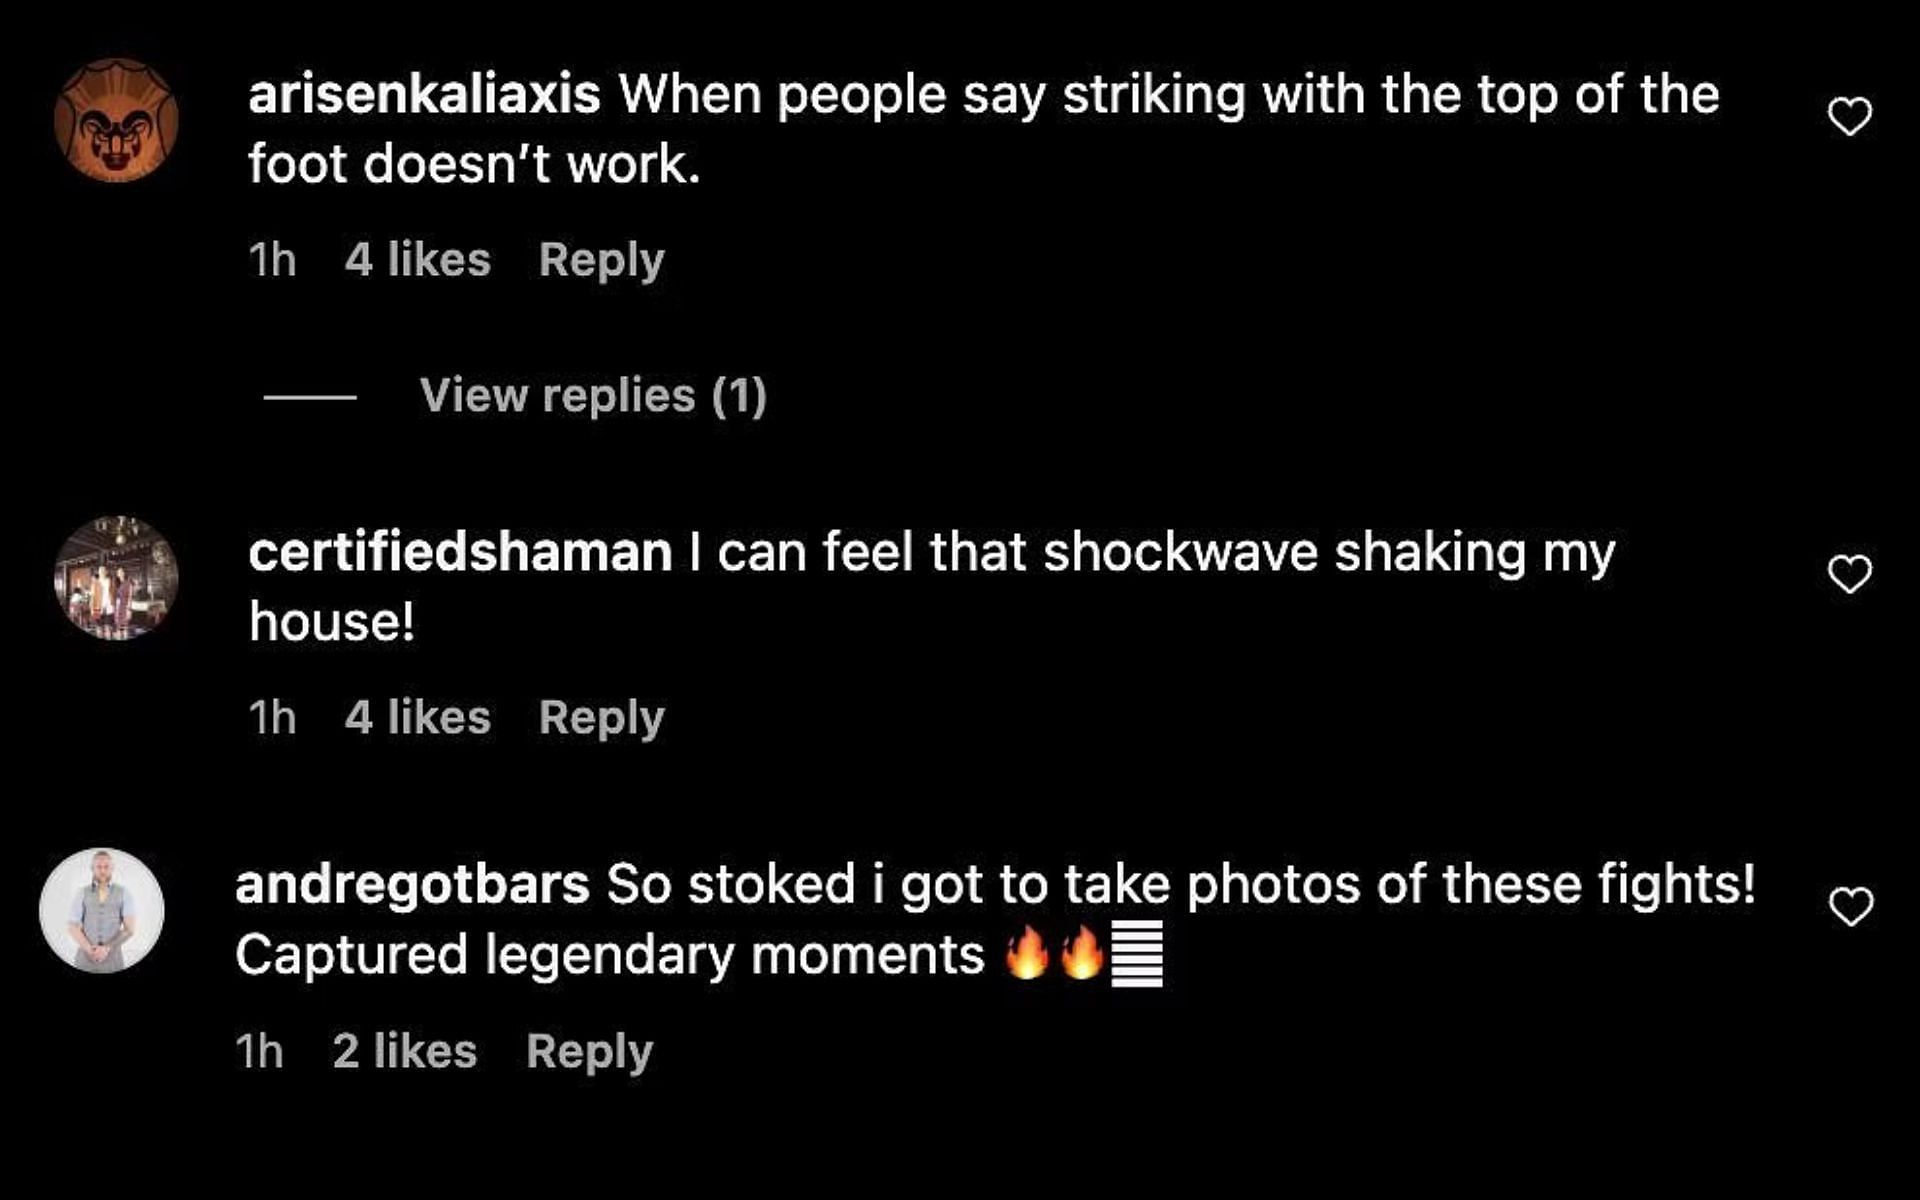 More comments on the video